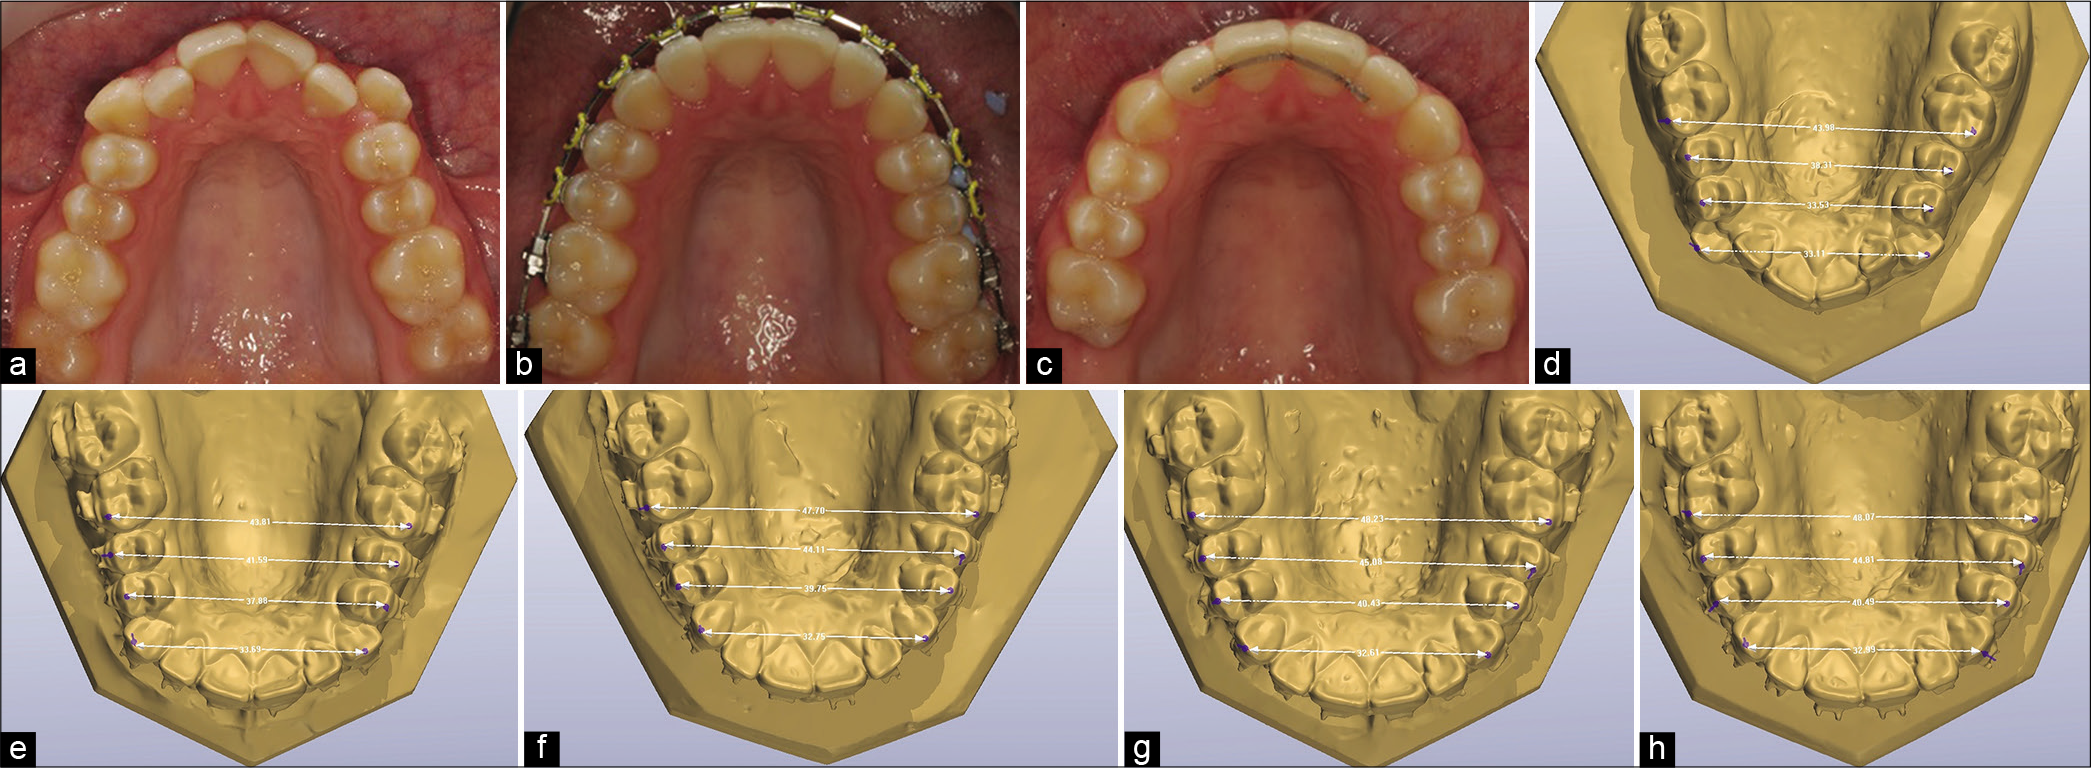 A mild Class III malocclusion with buccally displaced canine and narrow inter-premolar dimension (a). Following engagement of the archwires in the buccally displaced canines, significant dental expansion was achieved without recourse to adjuncts (b and c). The initial buccolingual position of the canines (d) contributed to the final arch form due to its anchorage value. Following engagement of a 0.014 inch Ni–Ti 4 mm of inter-premolar expansion arose (e). This increased to 6–7 mm in 14 × 25 inch (f) and 18 × 25 inch (g) Ni–Ti with intermolar expansion developing in more rigid rectangular Ni–Ti wires. Changes were largely consolidated in 19 × 25 inch stainless steel (h).